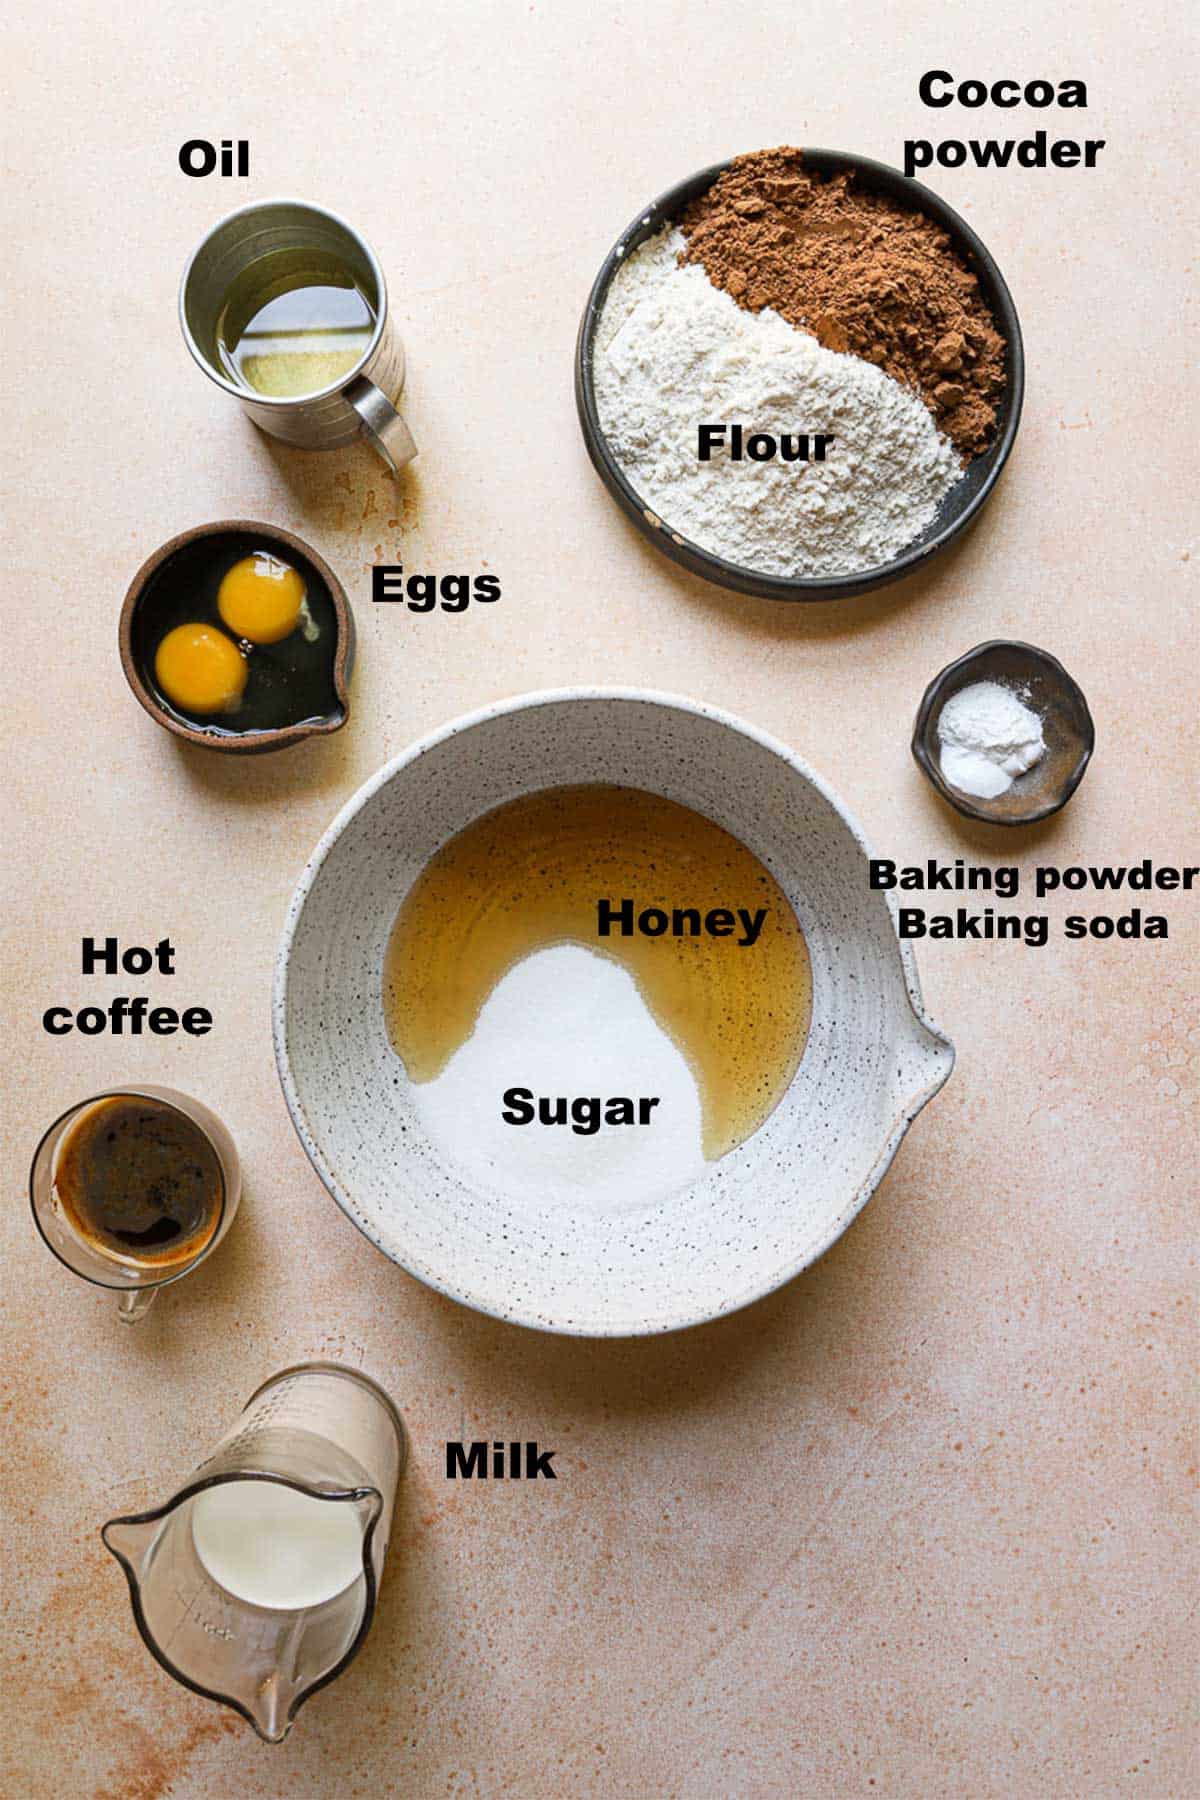 Ingredients to make chocolate cupcakes